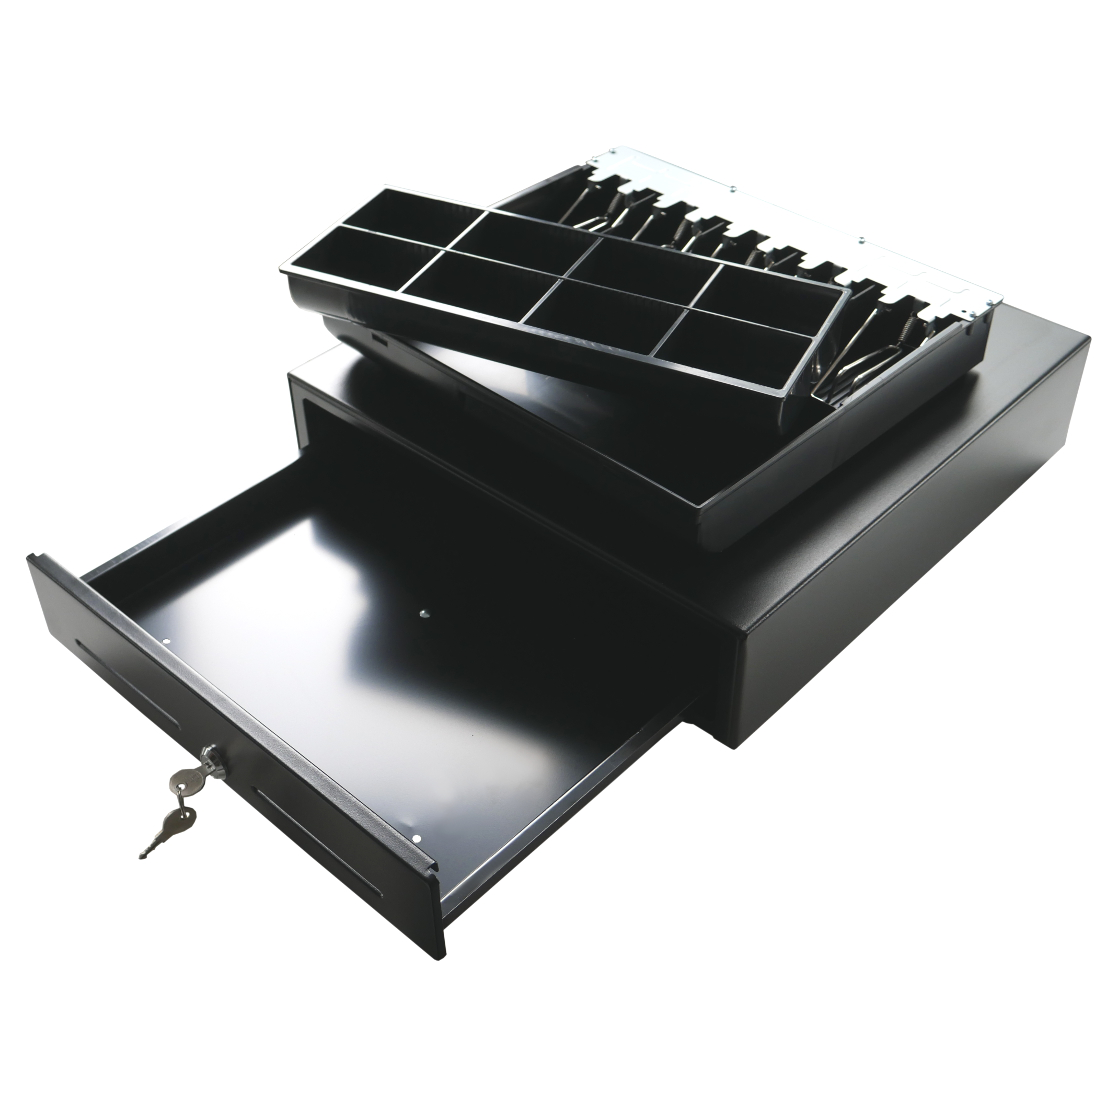 The HD-KR41 cash drawer is designed for storing all types of monetary funds and securities.